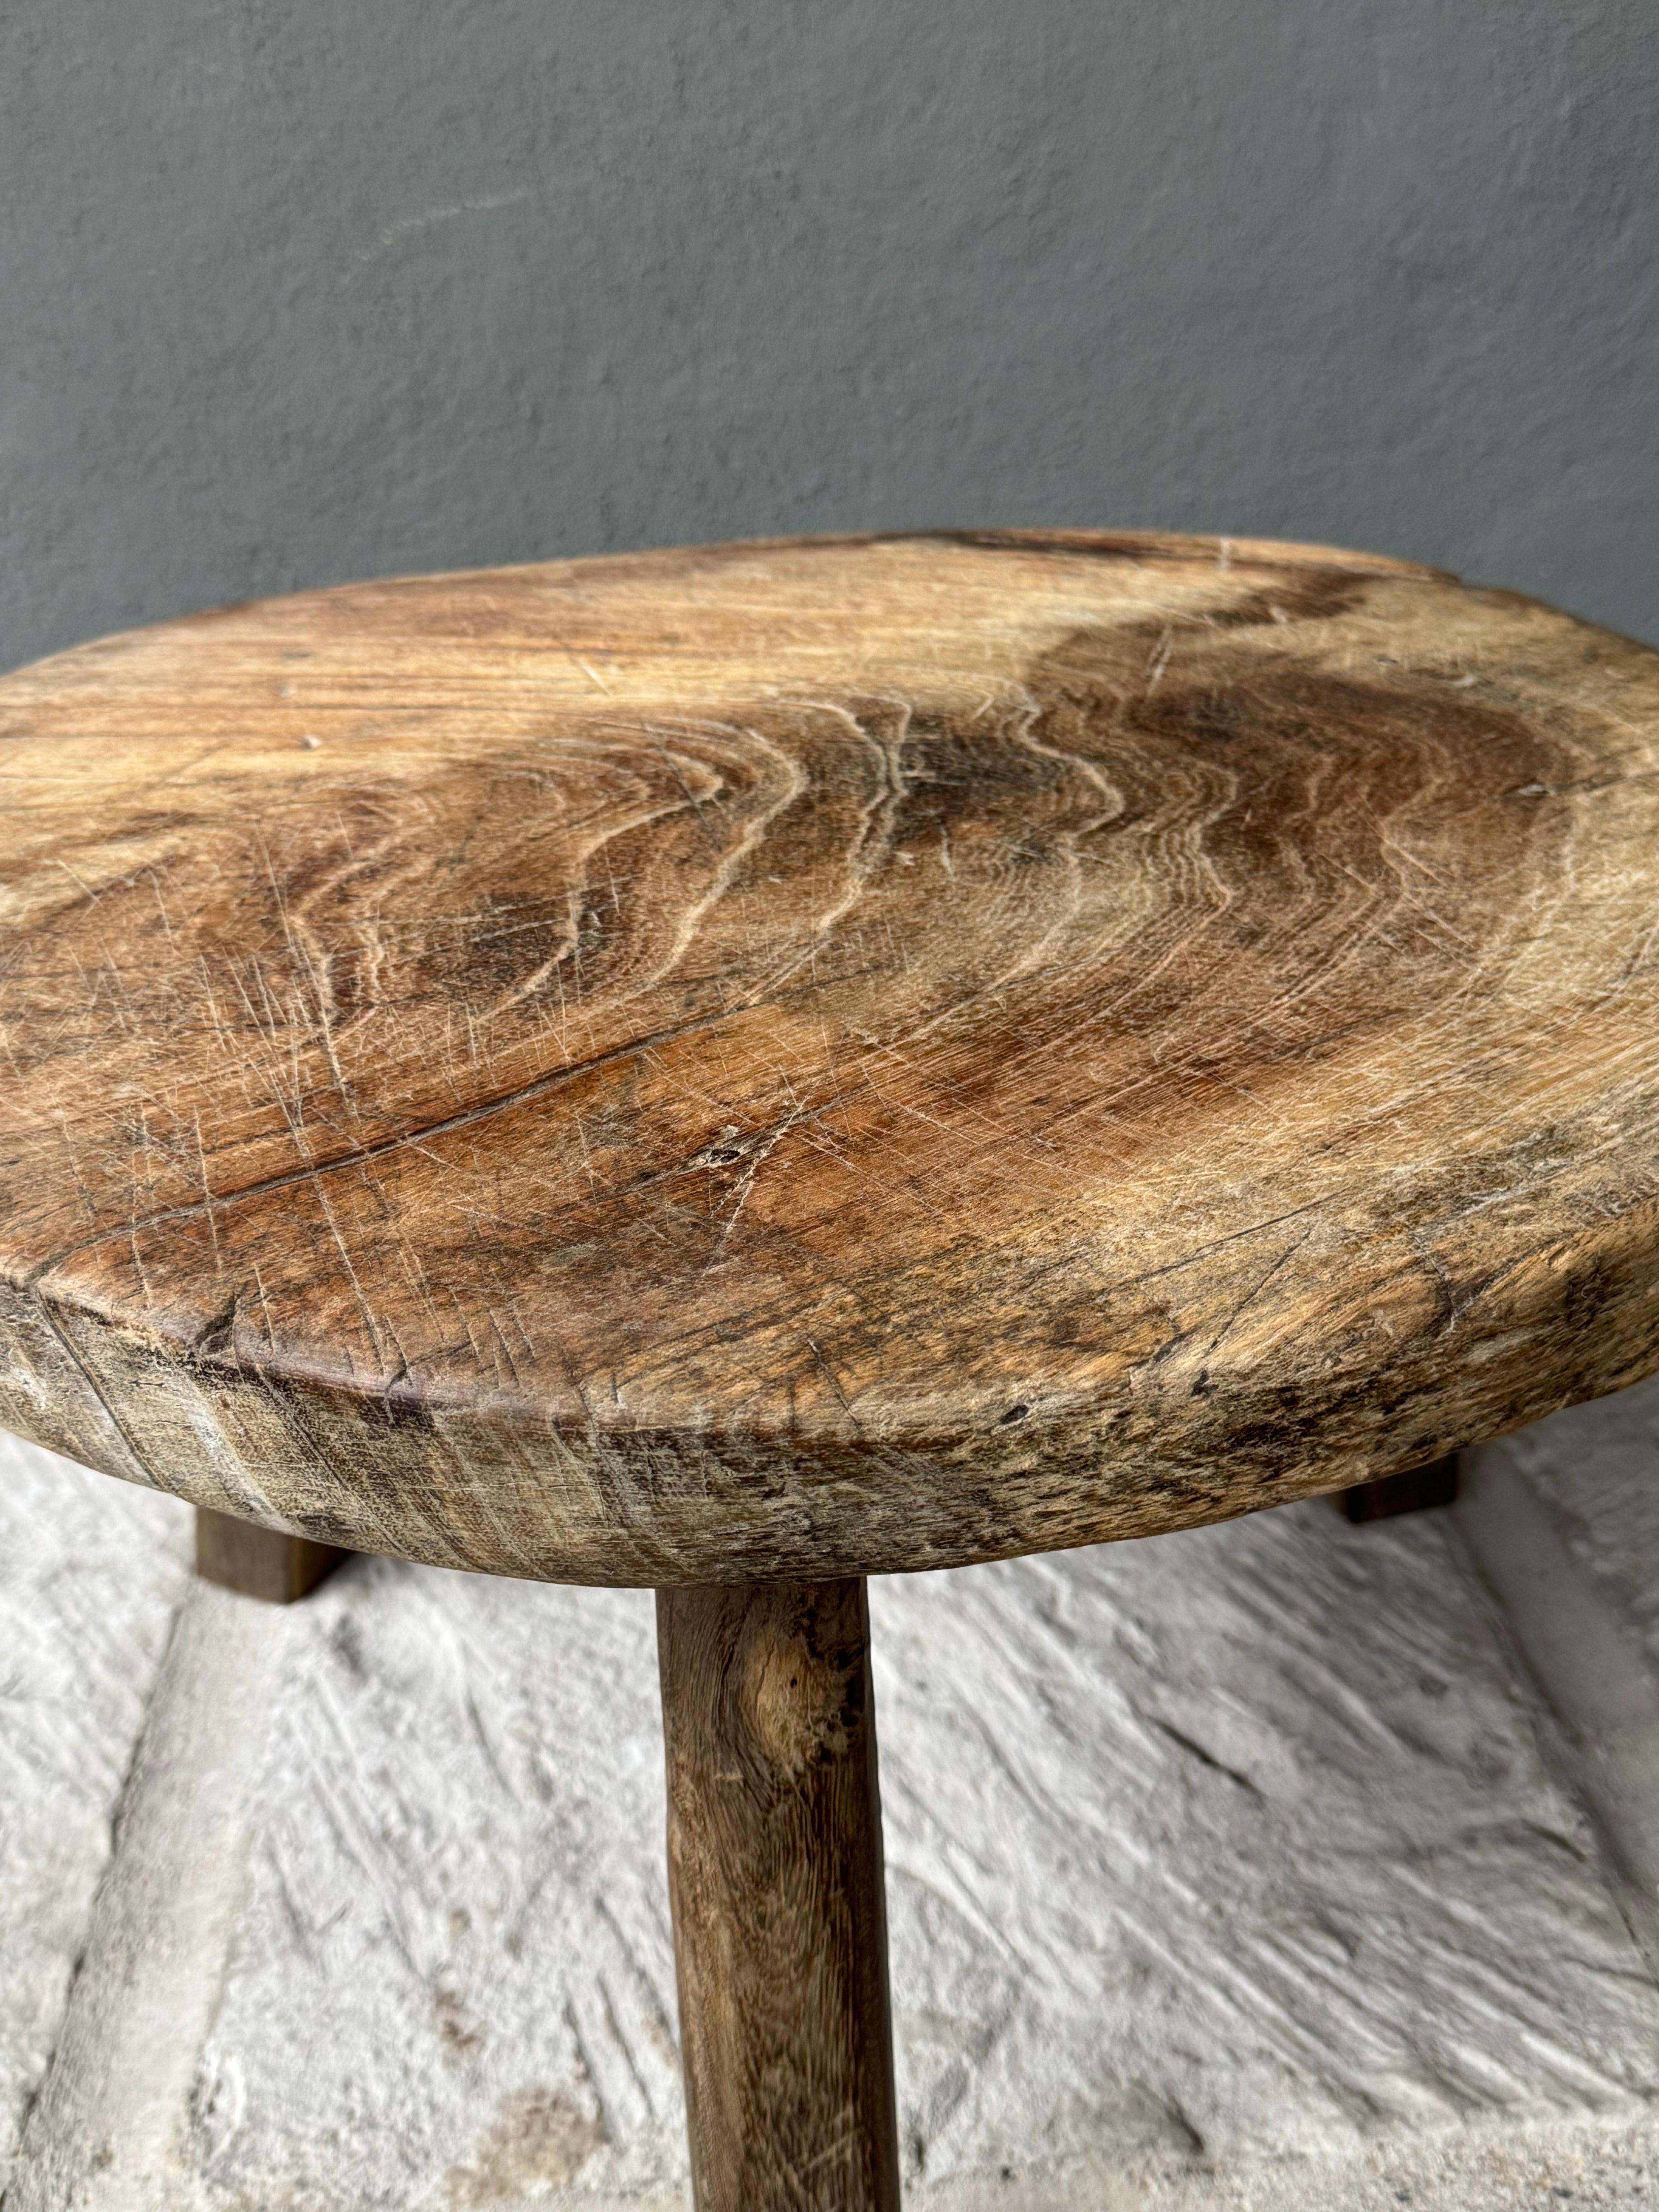 Primitive Hardwood Round Table From Central Yucatan, Mexico, Late 20th Century For Sale 1